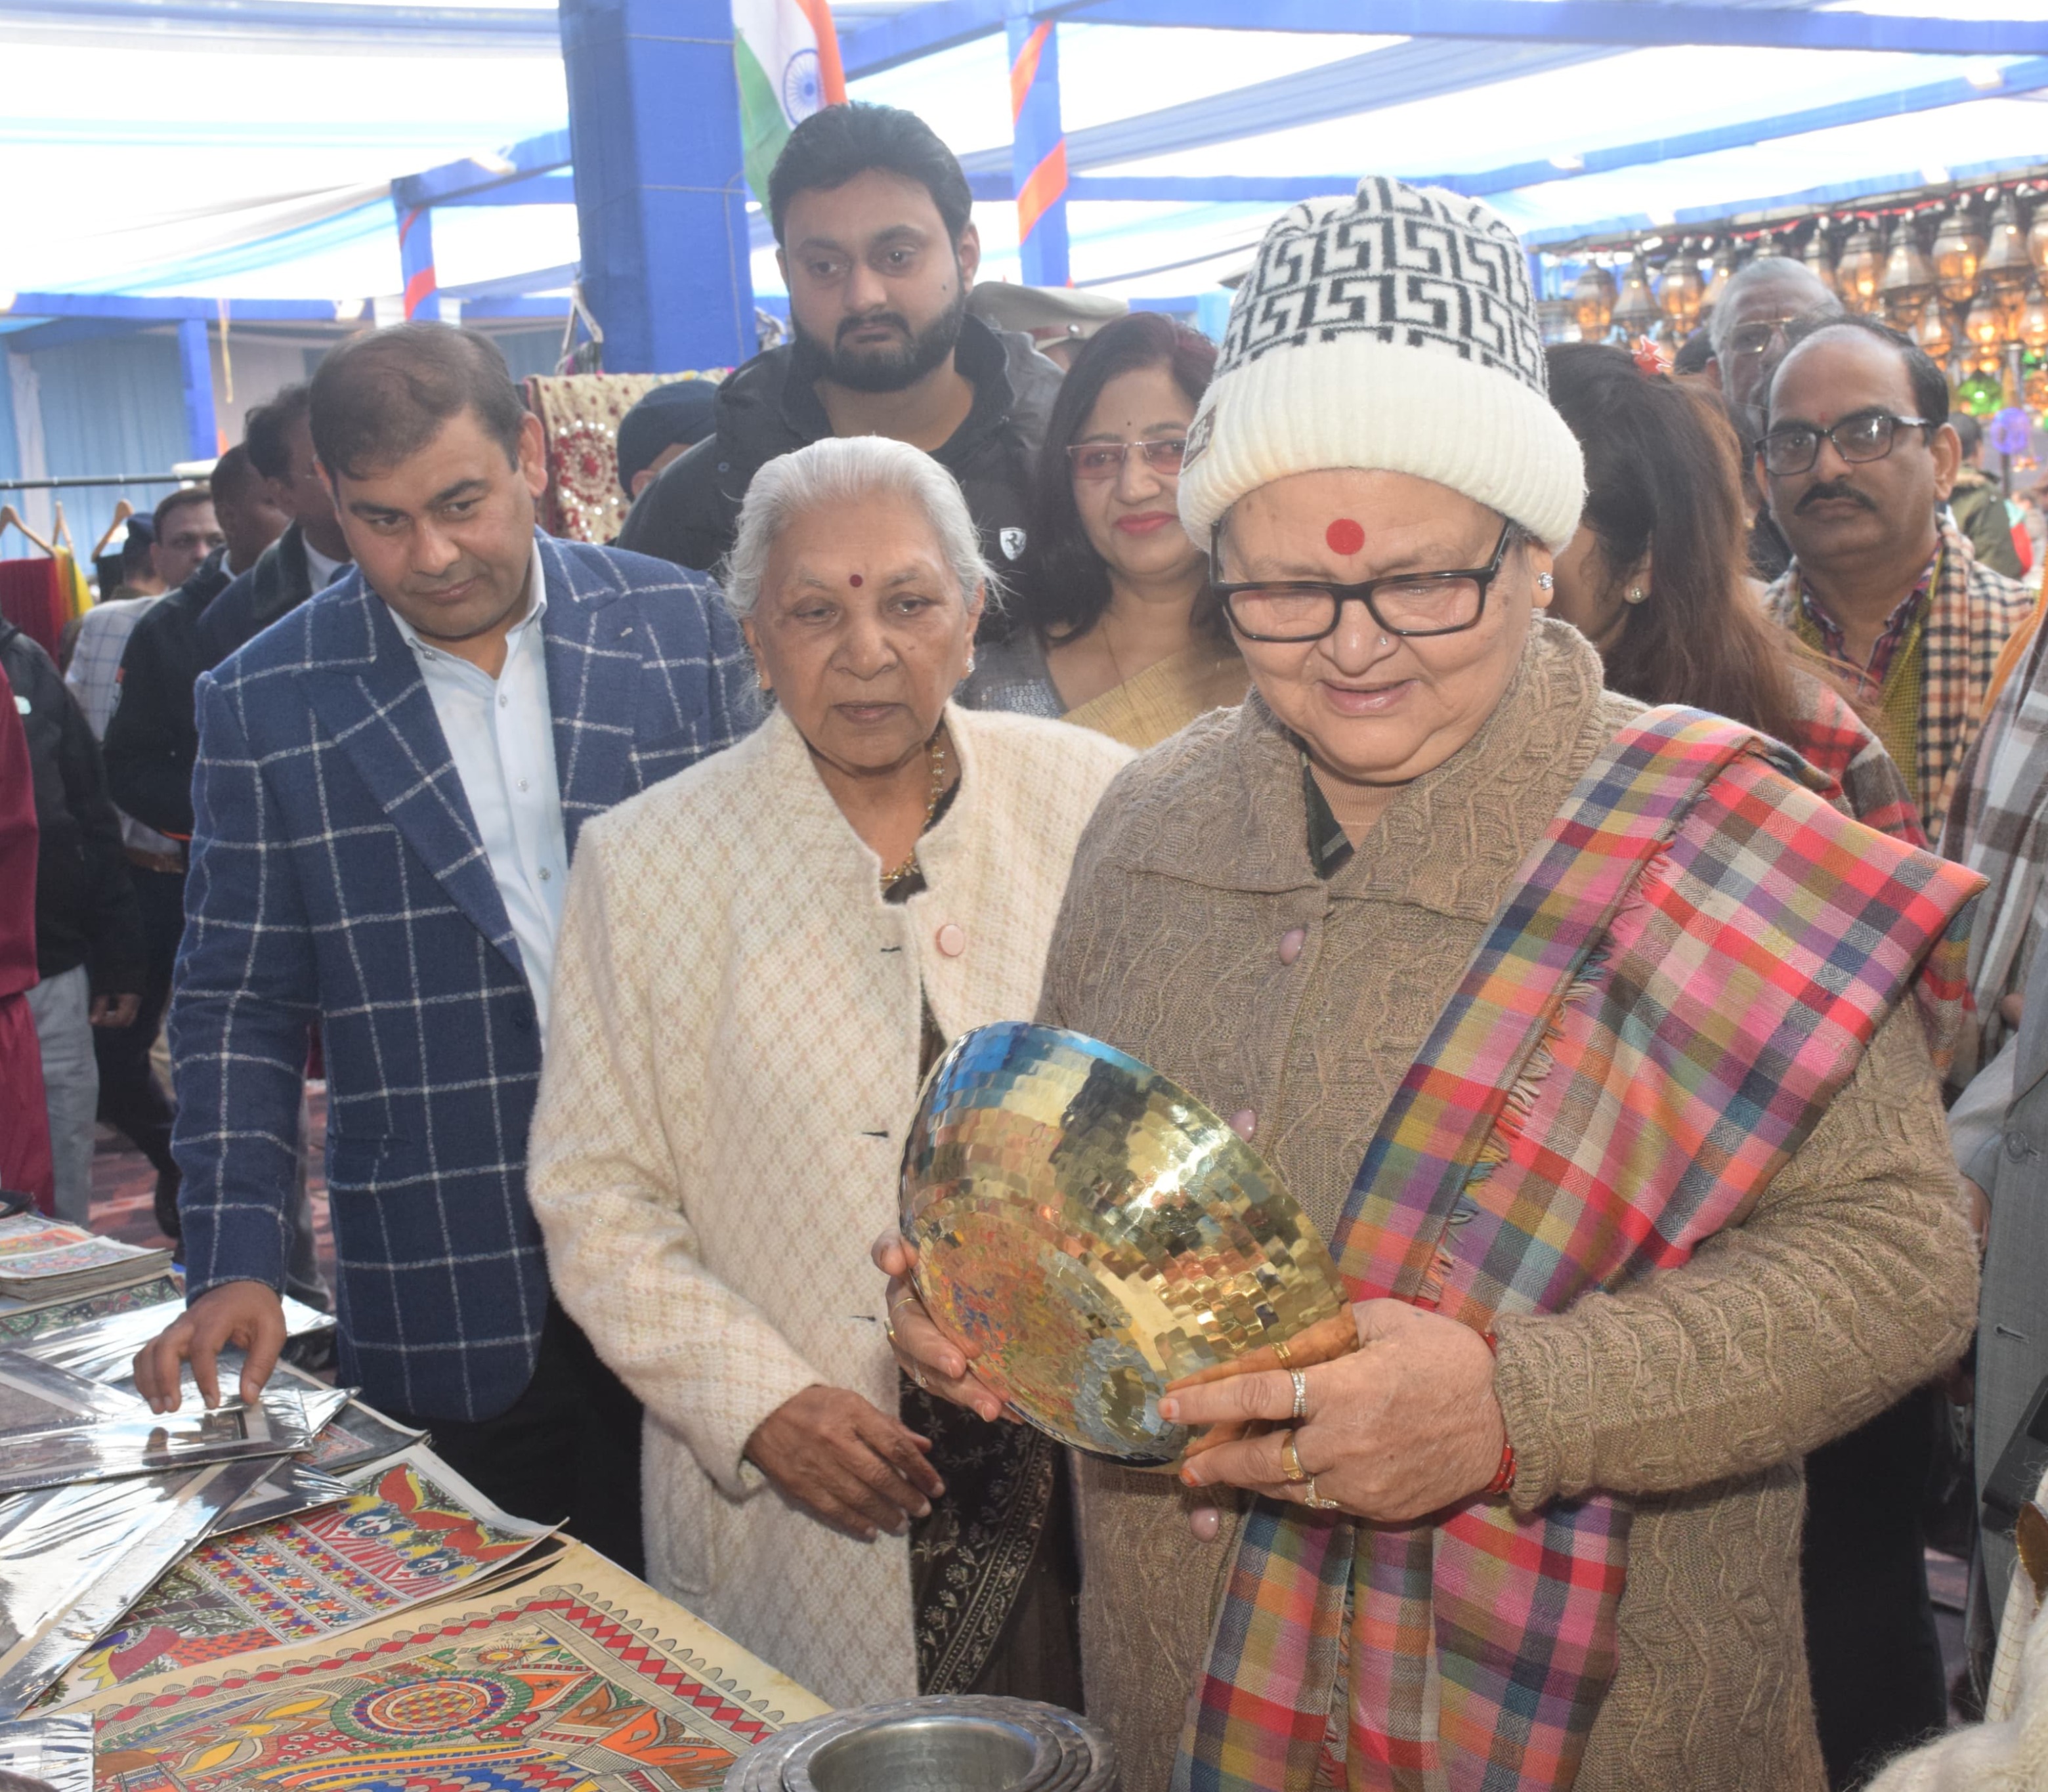 The Governor visited the Craftroots exhibition of handicrafts and artisan products in Kanpur and encouraged the artisans.